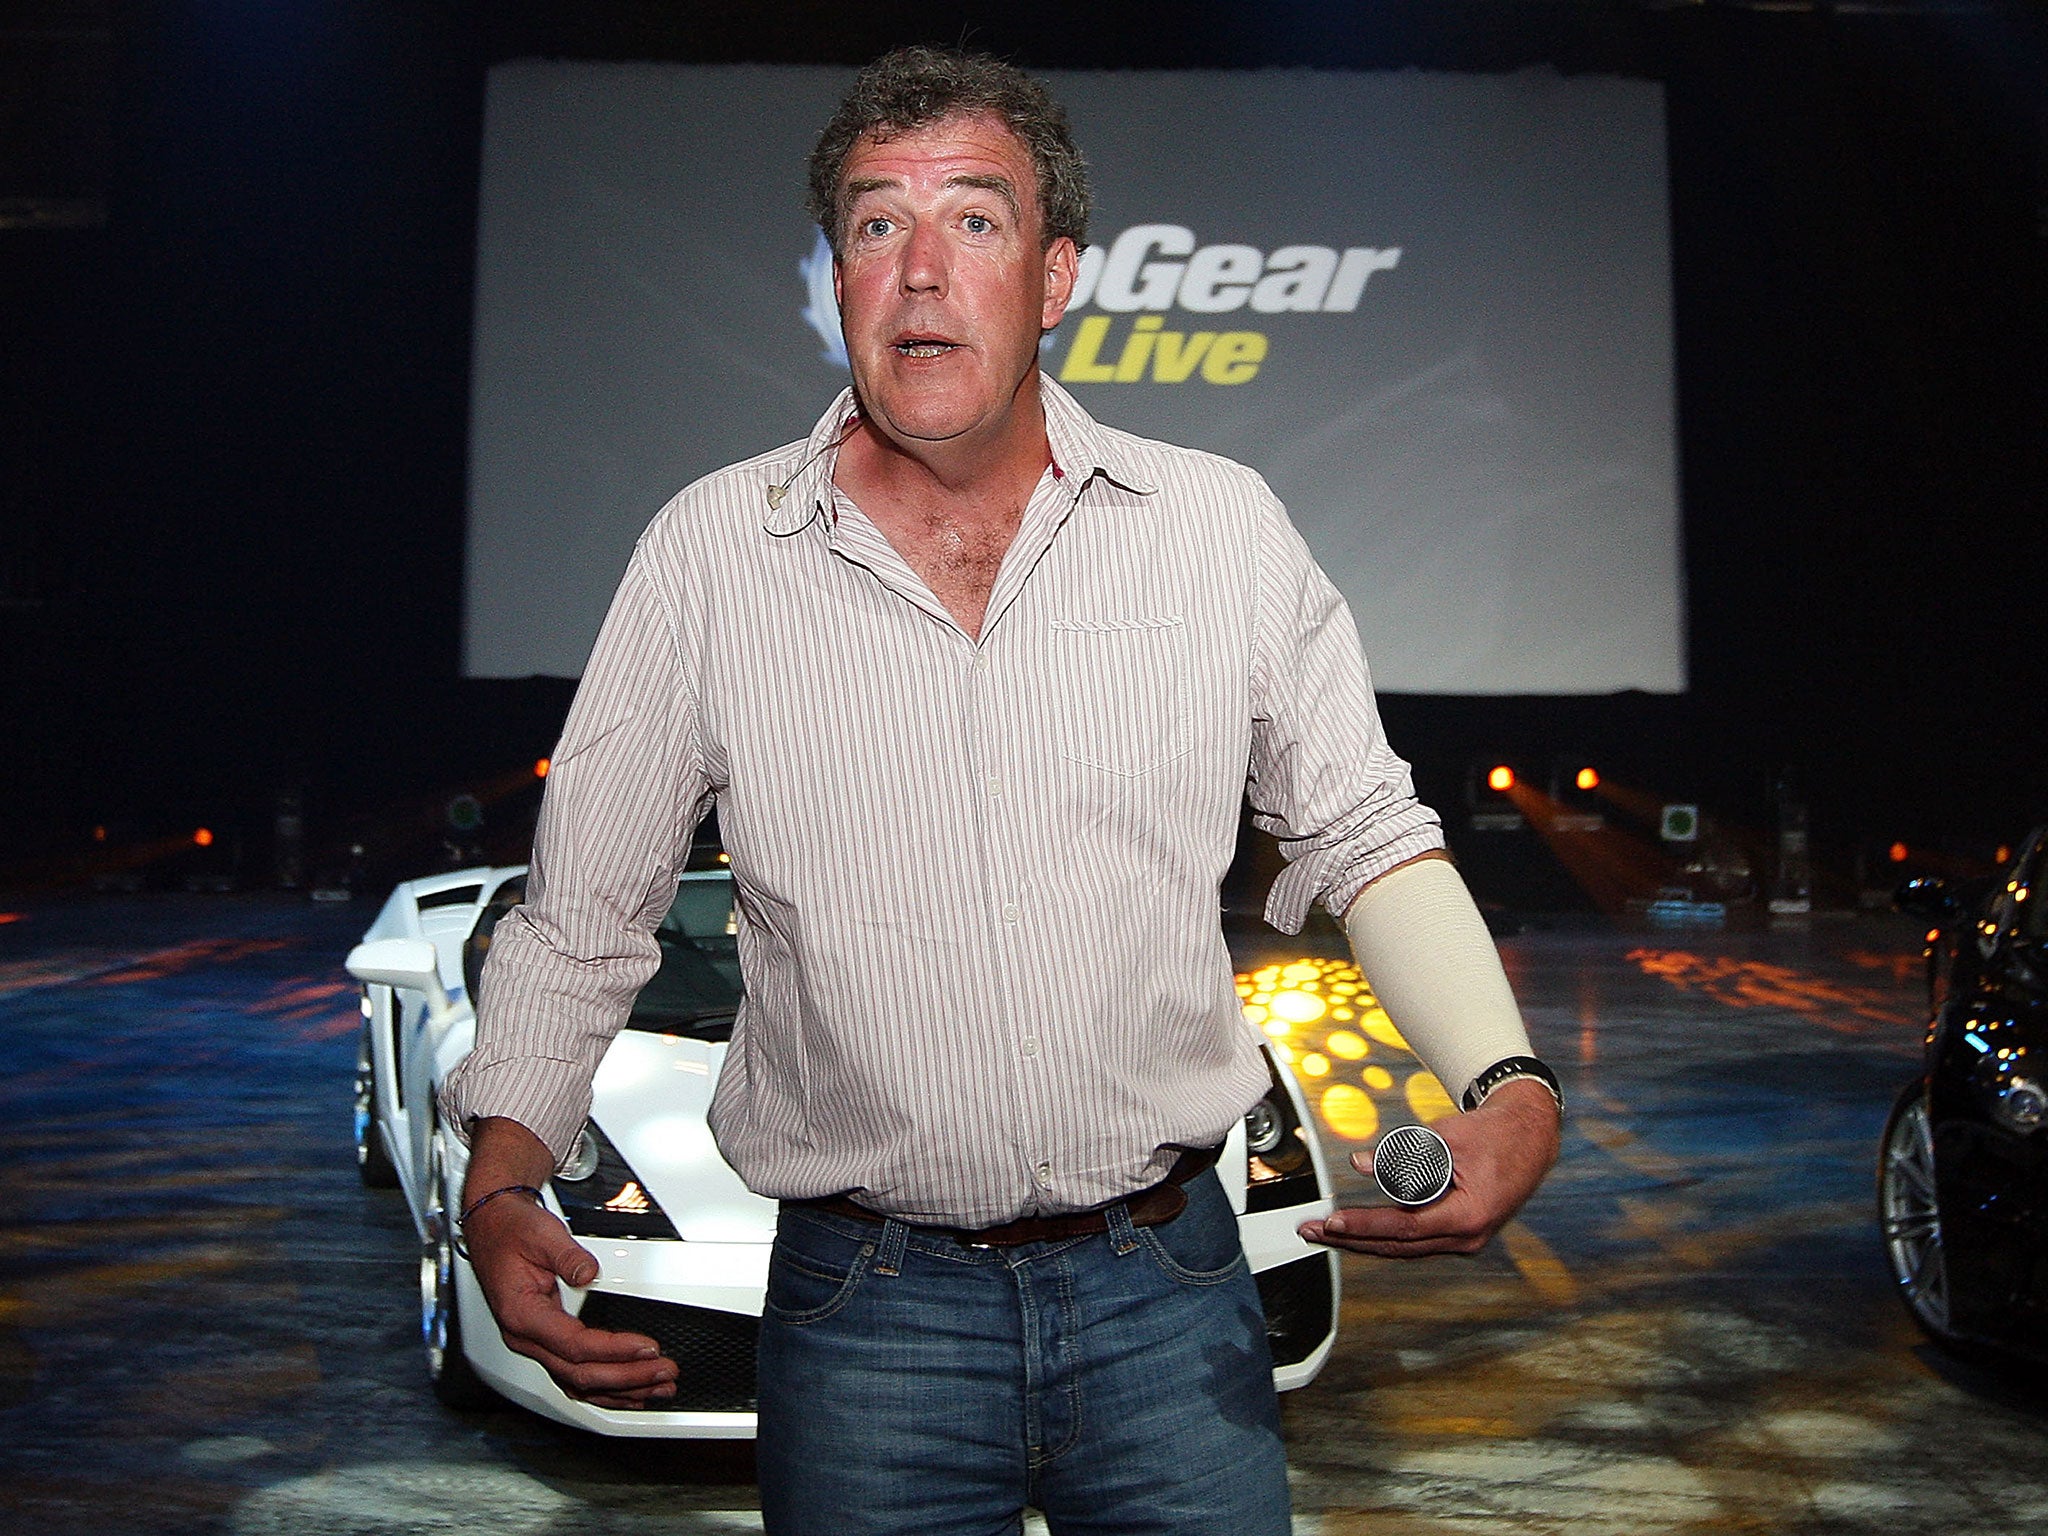 Top Gear host Jeremy Clarkson denies any wrongdoing in Argentina